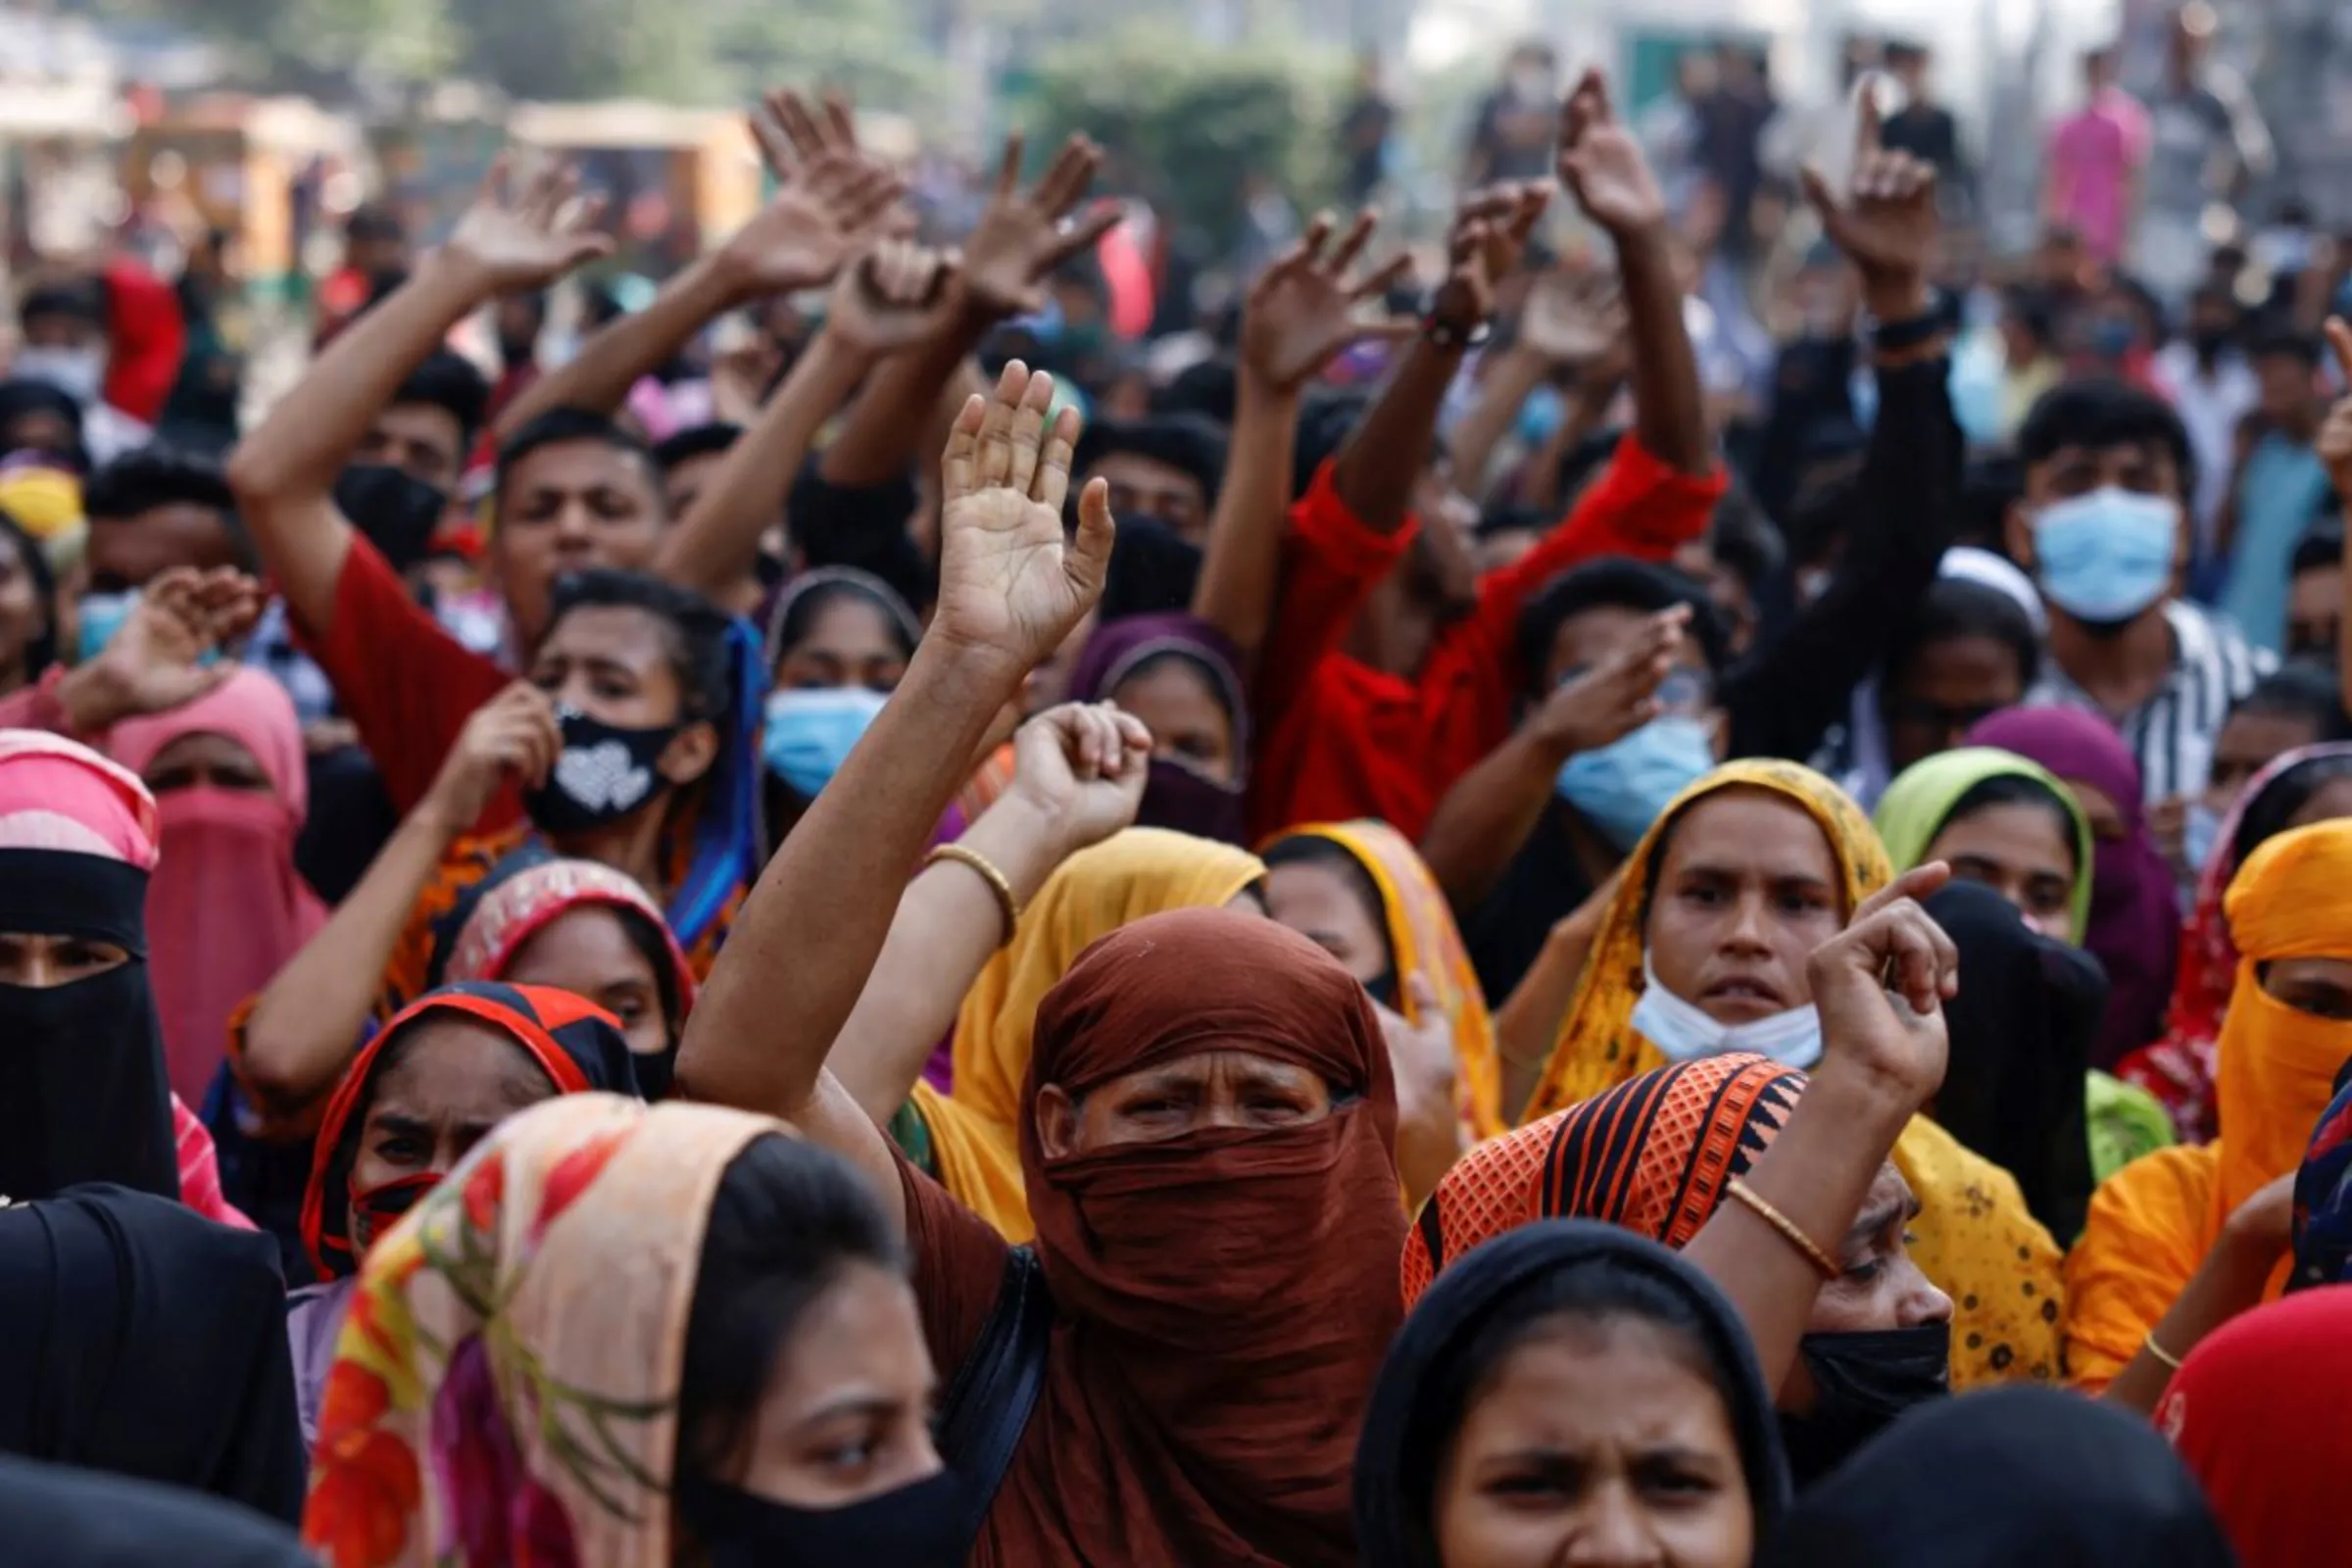 Garment industry workers shout slogans as they continue to protest in the street for their wage raise, at Mirpur area of Dhaka, Bangladesh, November 12, 2023. REUTERS/Mohammad Ponir Hossain